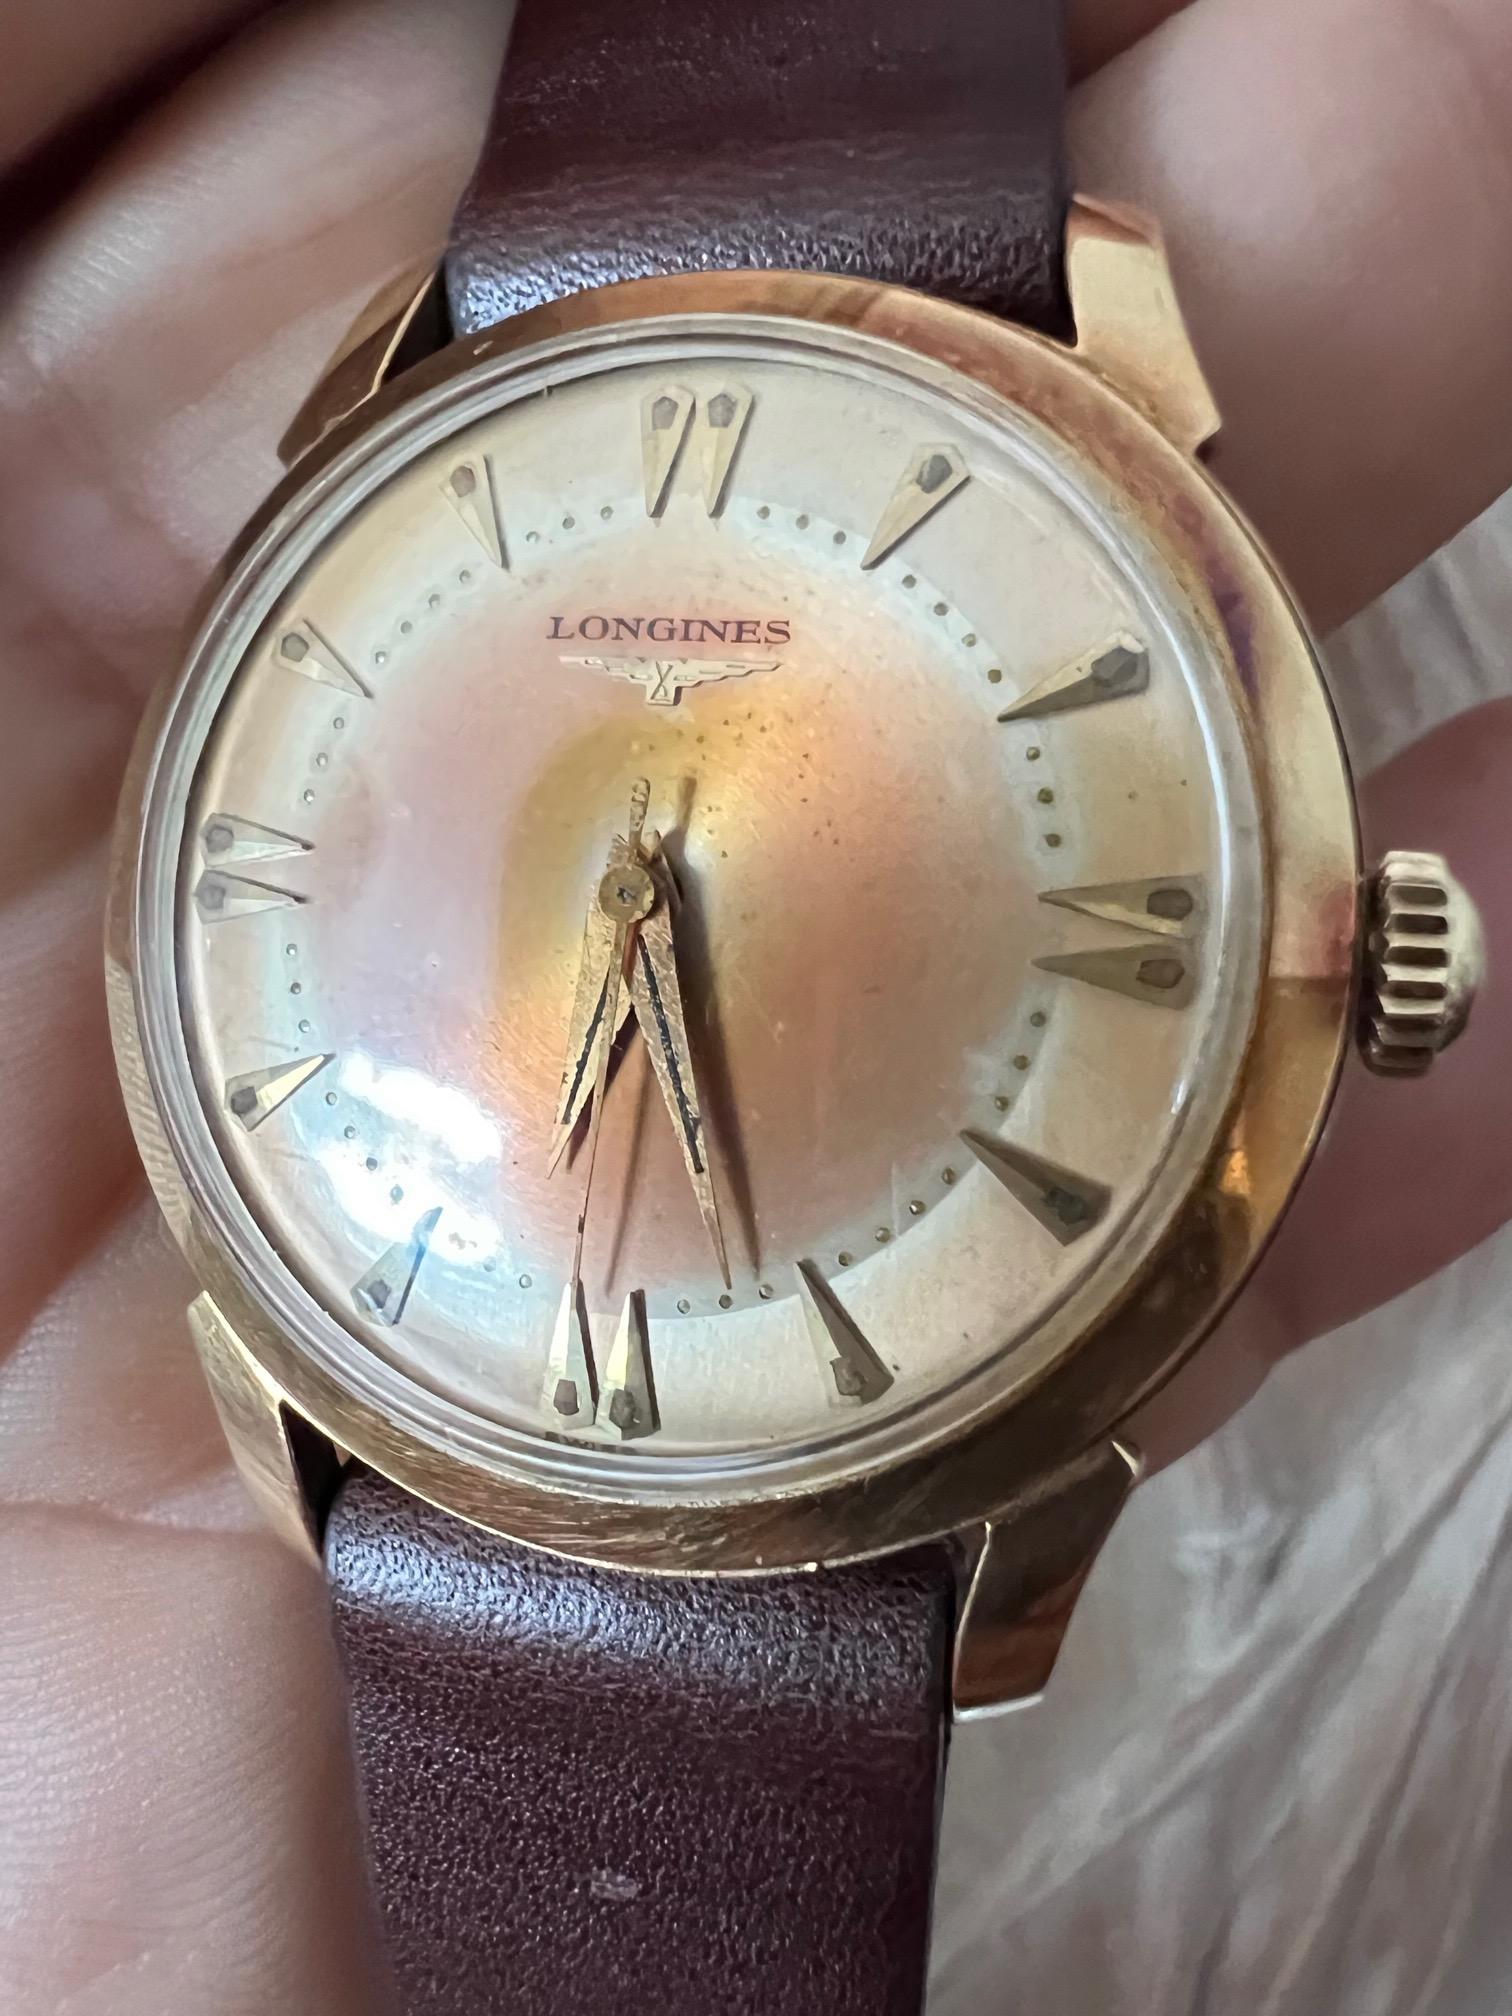 Longines 14k Gold Watch Tropical Patina In Good Condition For Sale In Saint Petersburg, FL